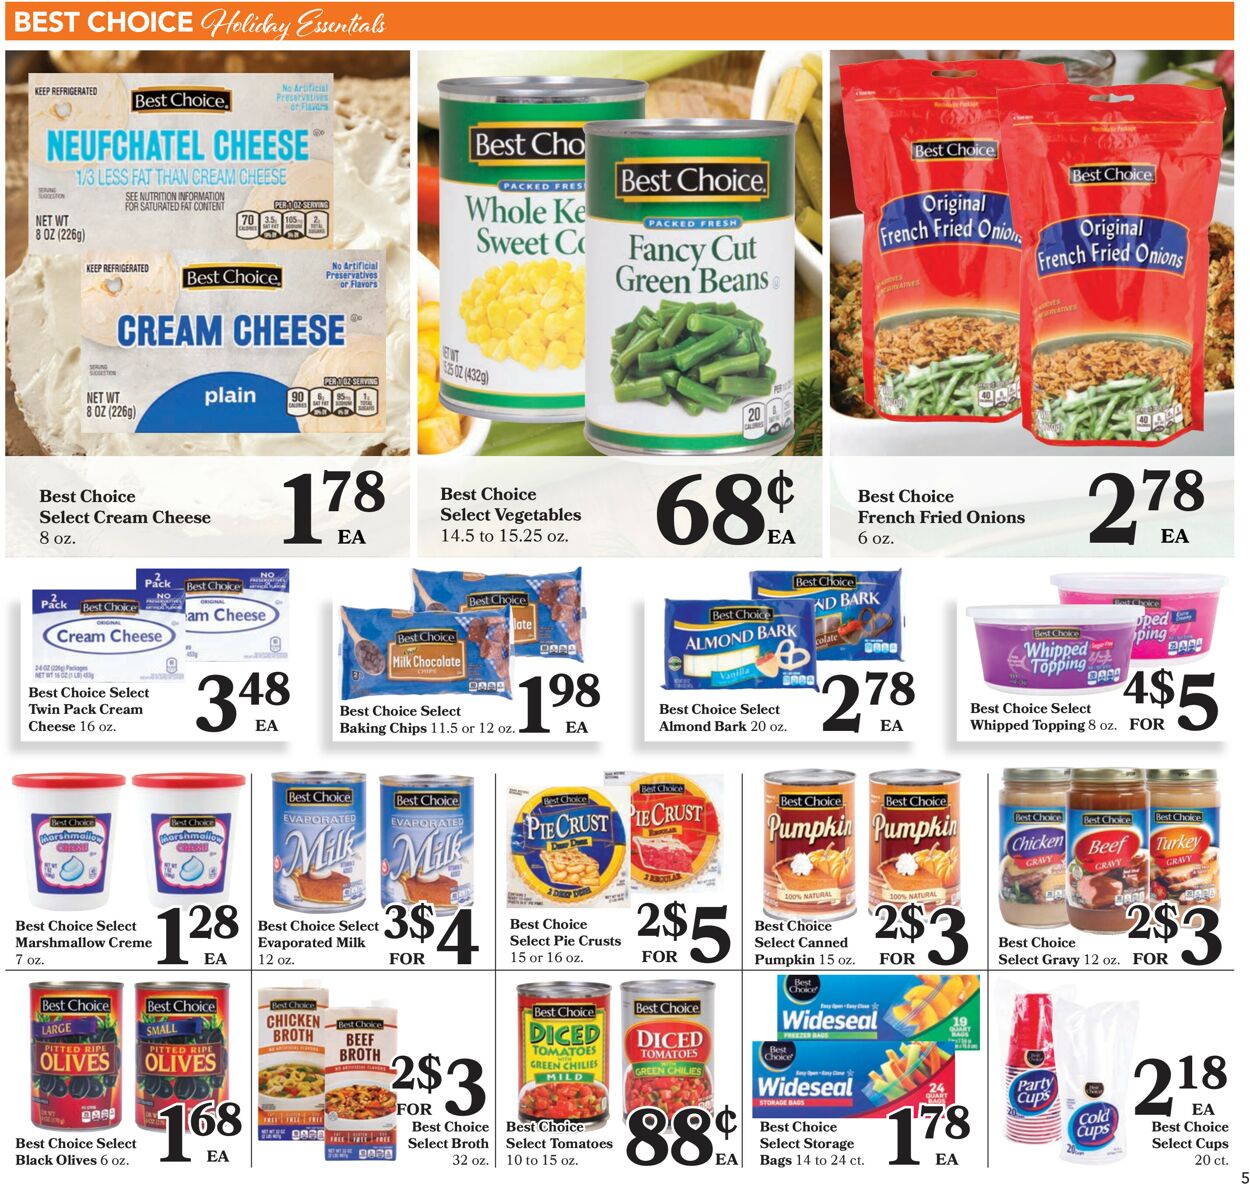 Catalogue Harps Foods from 11/02/2022